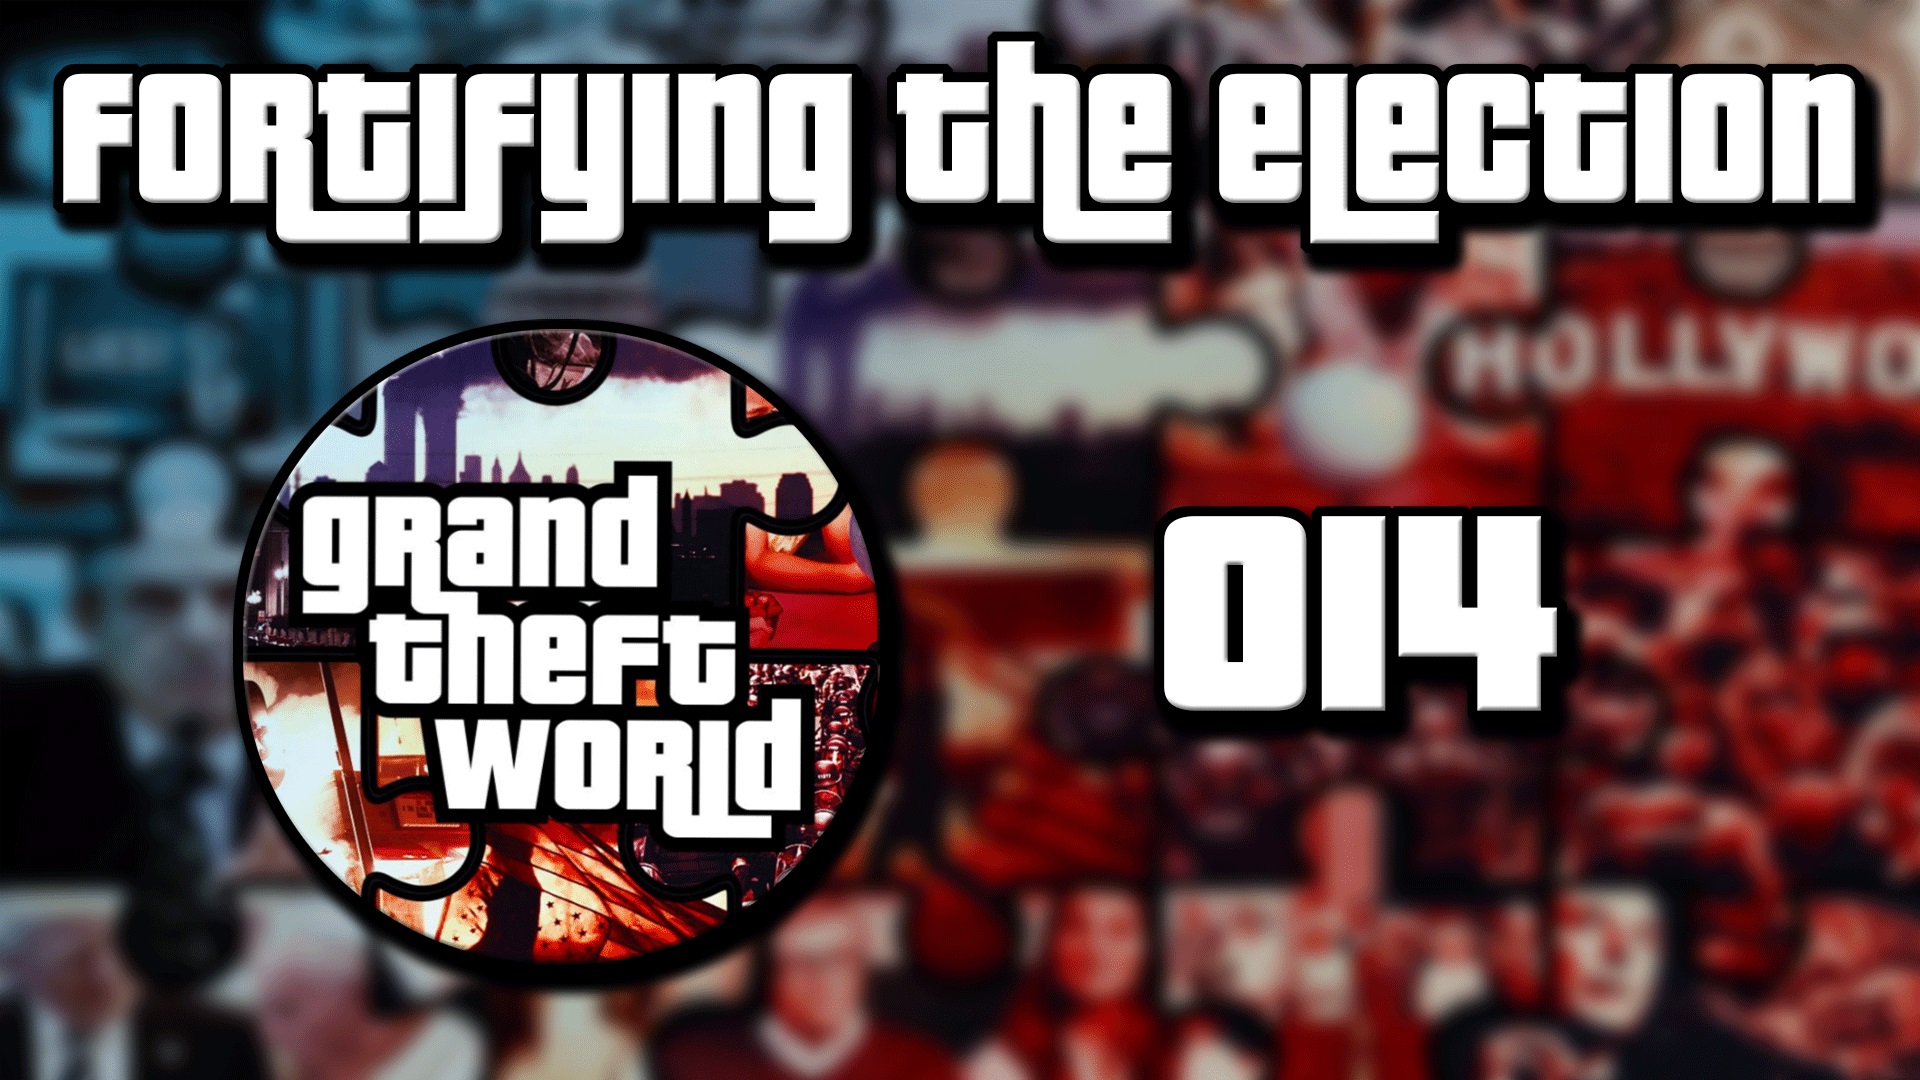 Grand Theft World Podcast 014 | Fortifying The Election